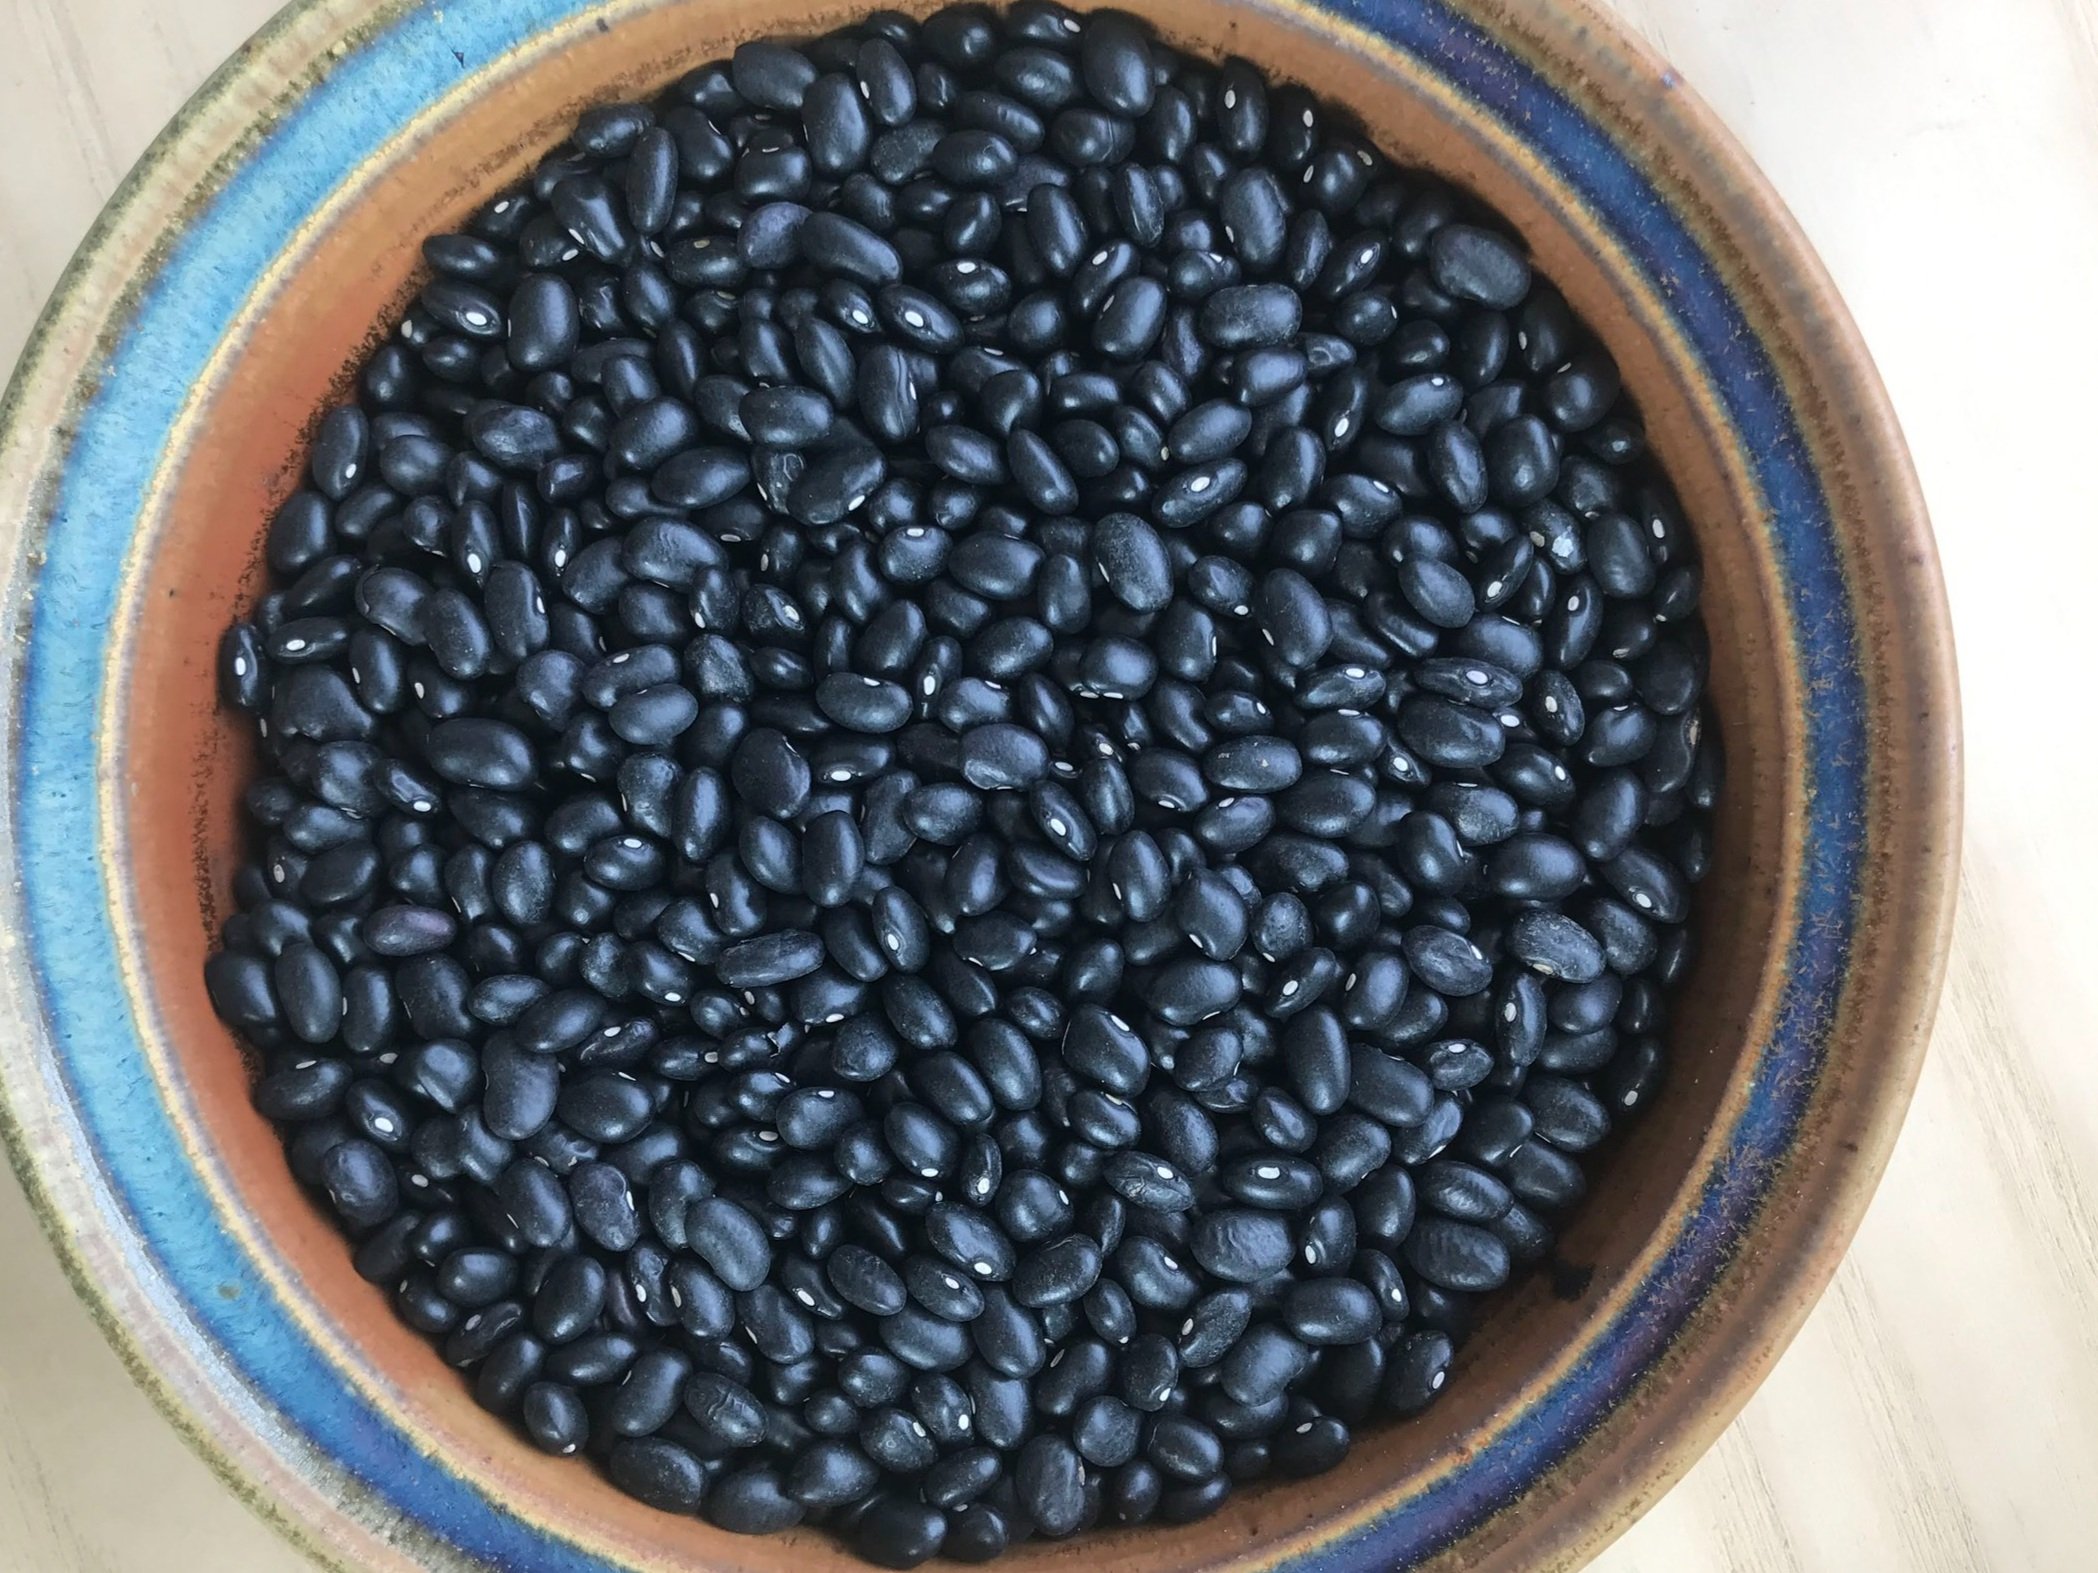 Black Turtle // Classic staple bean with silky, inky broth and full flavor. Firm texture in a compact package holds together nicely in any dish.